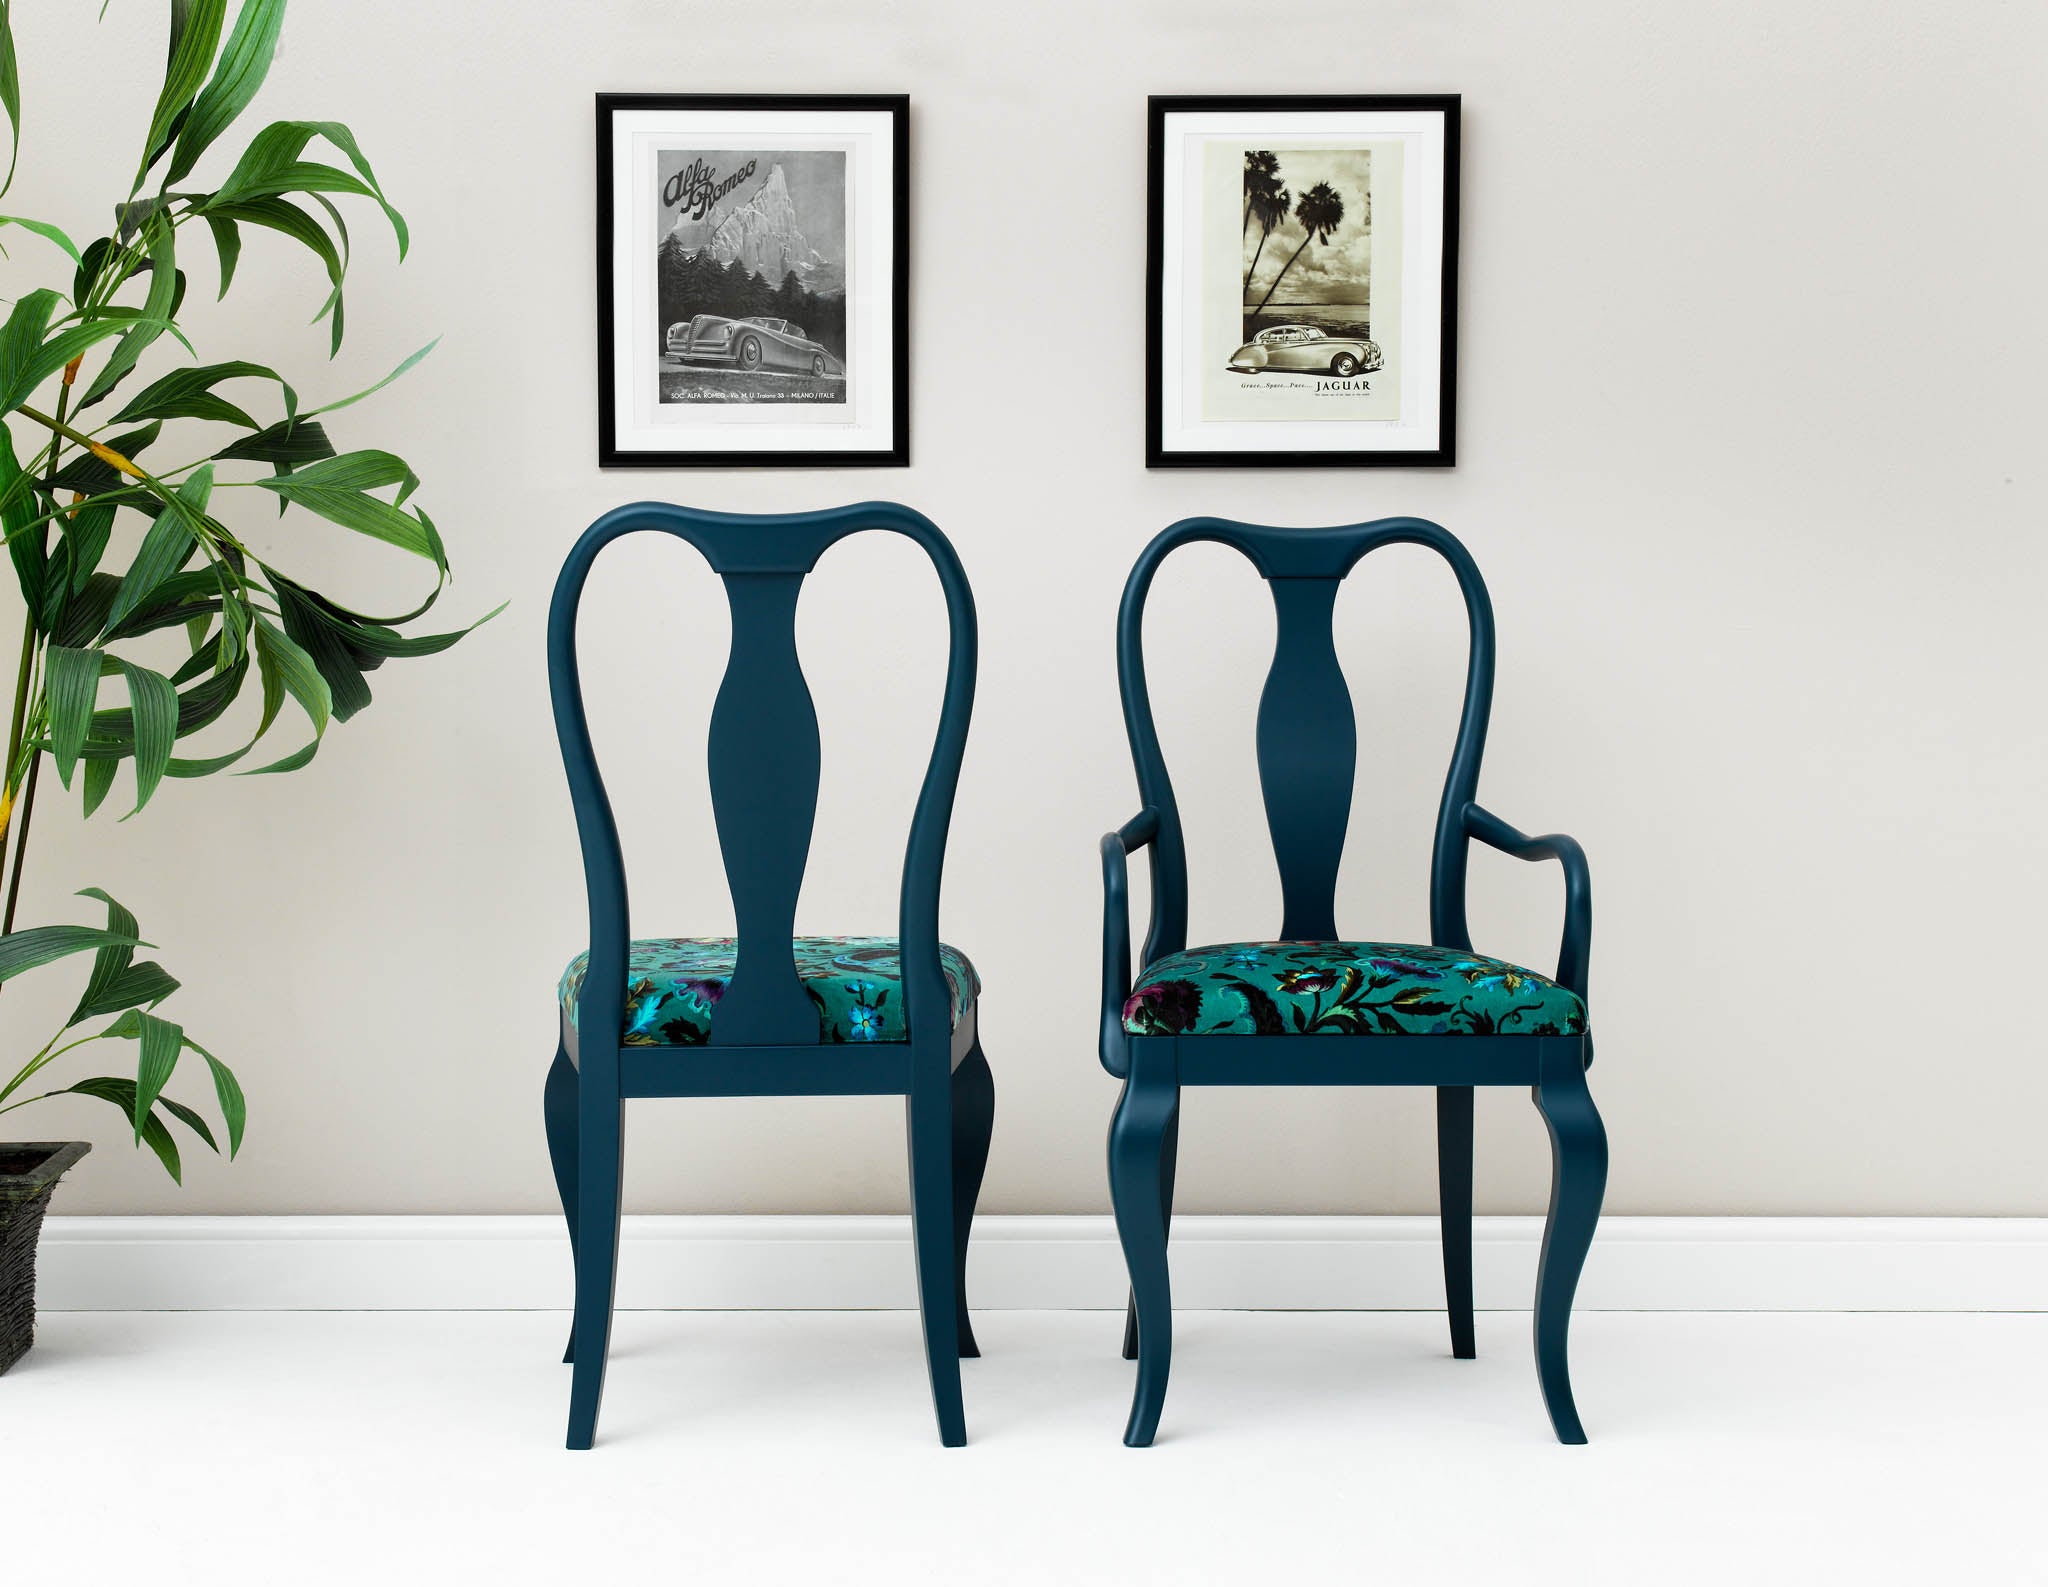 Marco Chair Upholstered in Florika by House of Hackney